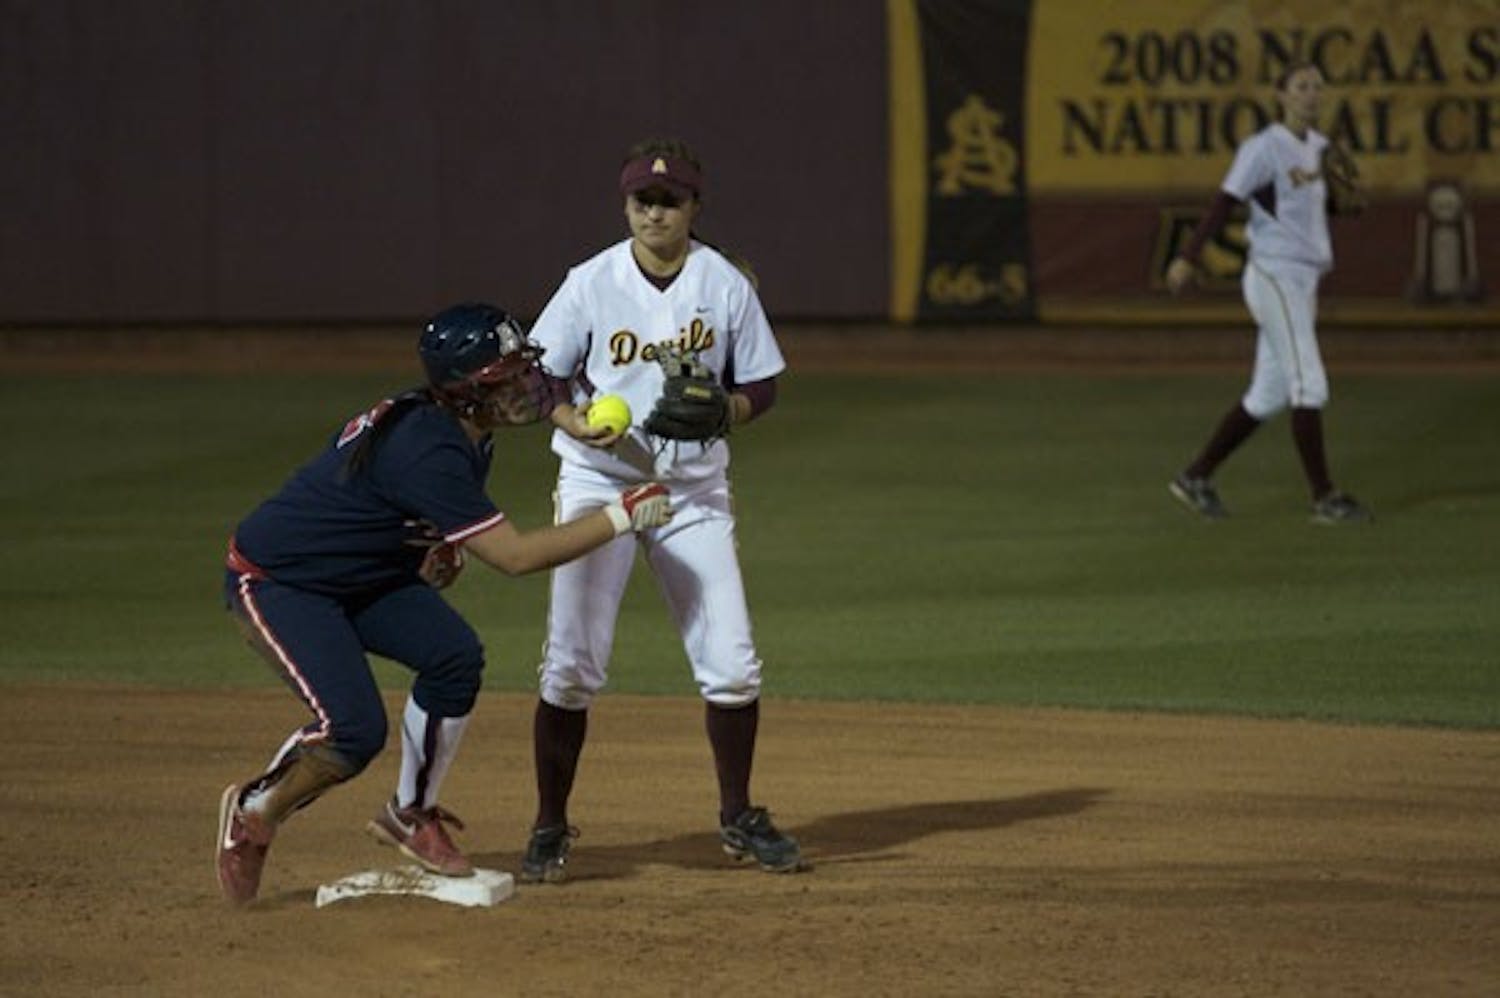 TWO OF THE BEST: ASU freshman baseman Sam Parlich looks on after a play at second base during ASU's 12-6 loss to U A are ranked in the top 10 nationally. (Photo by Scott Stuk)